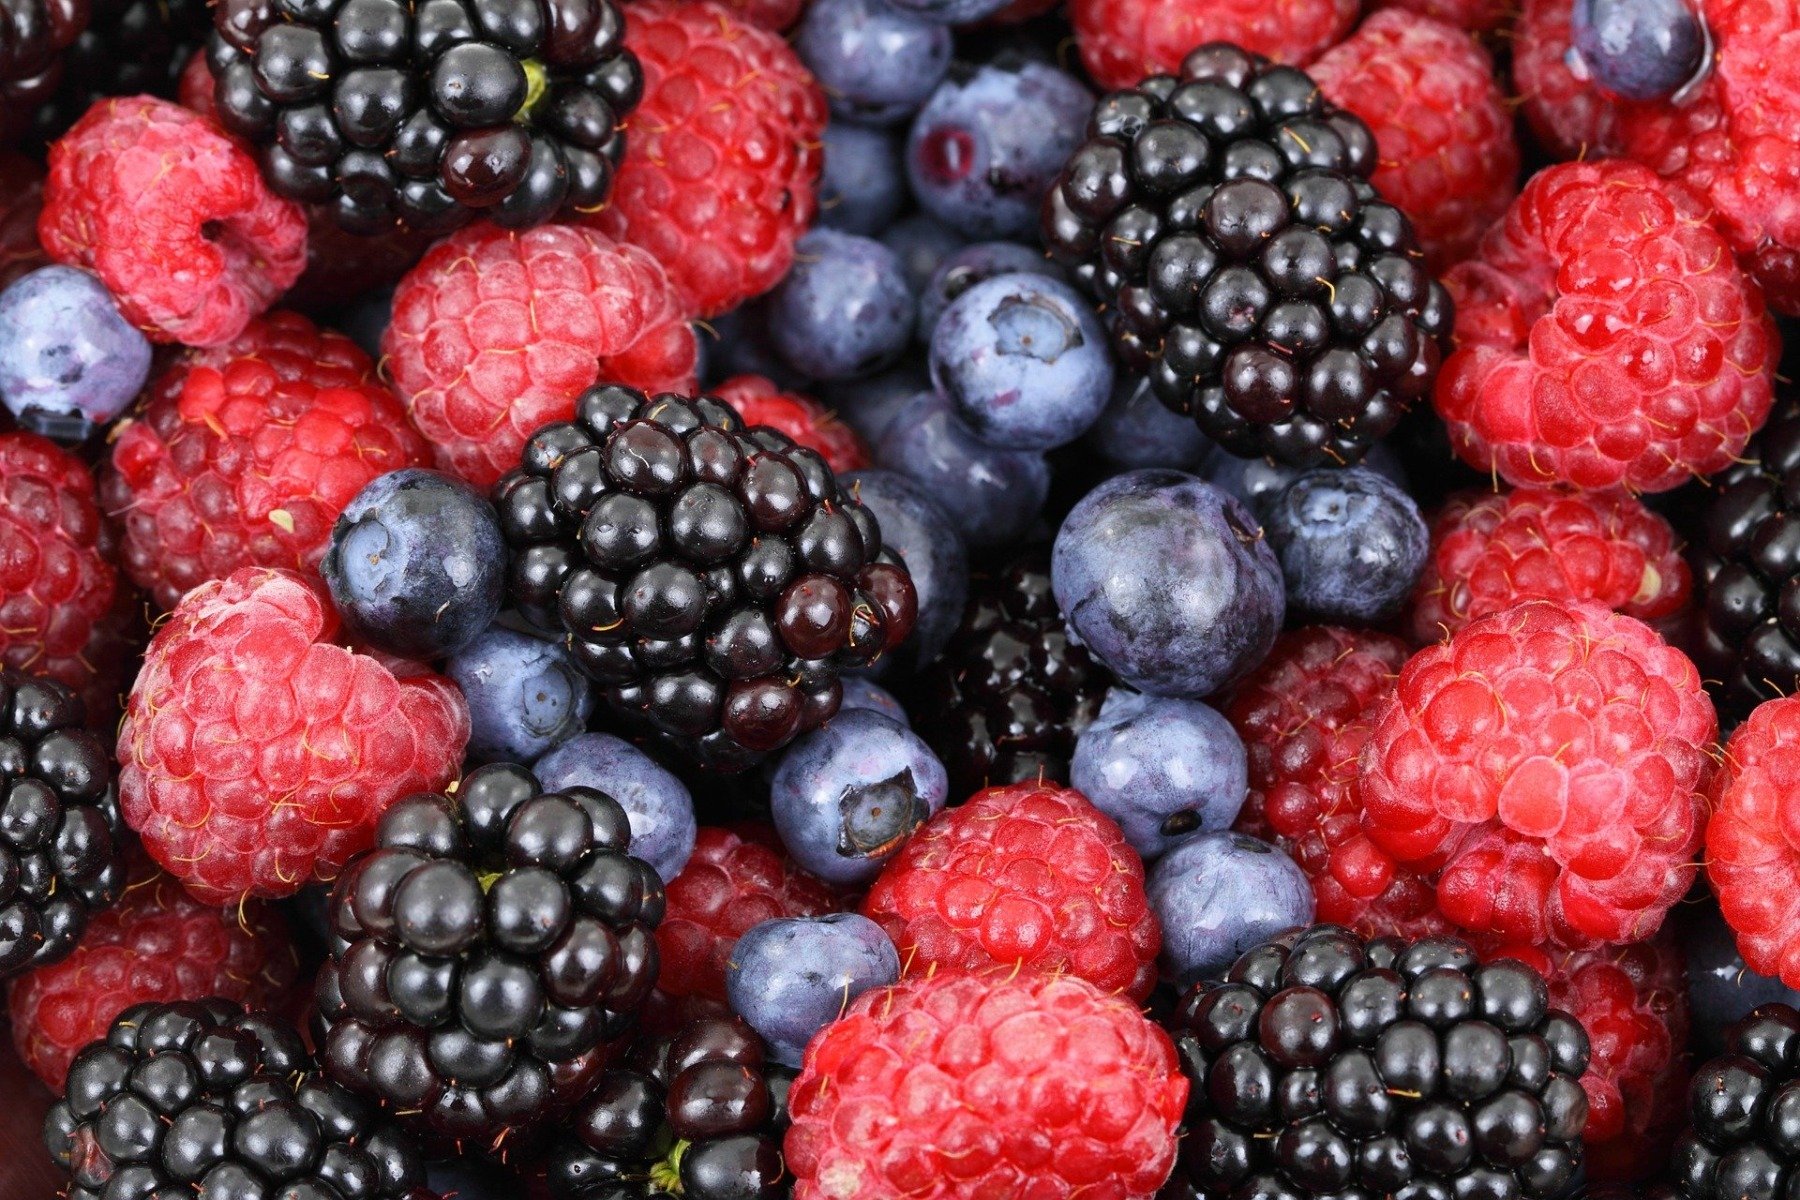 The best kinds of superfoods - berries